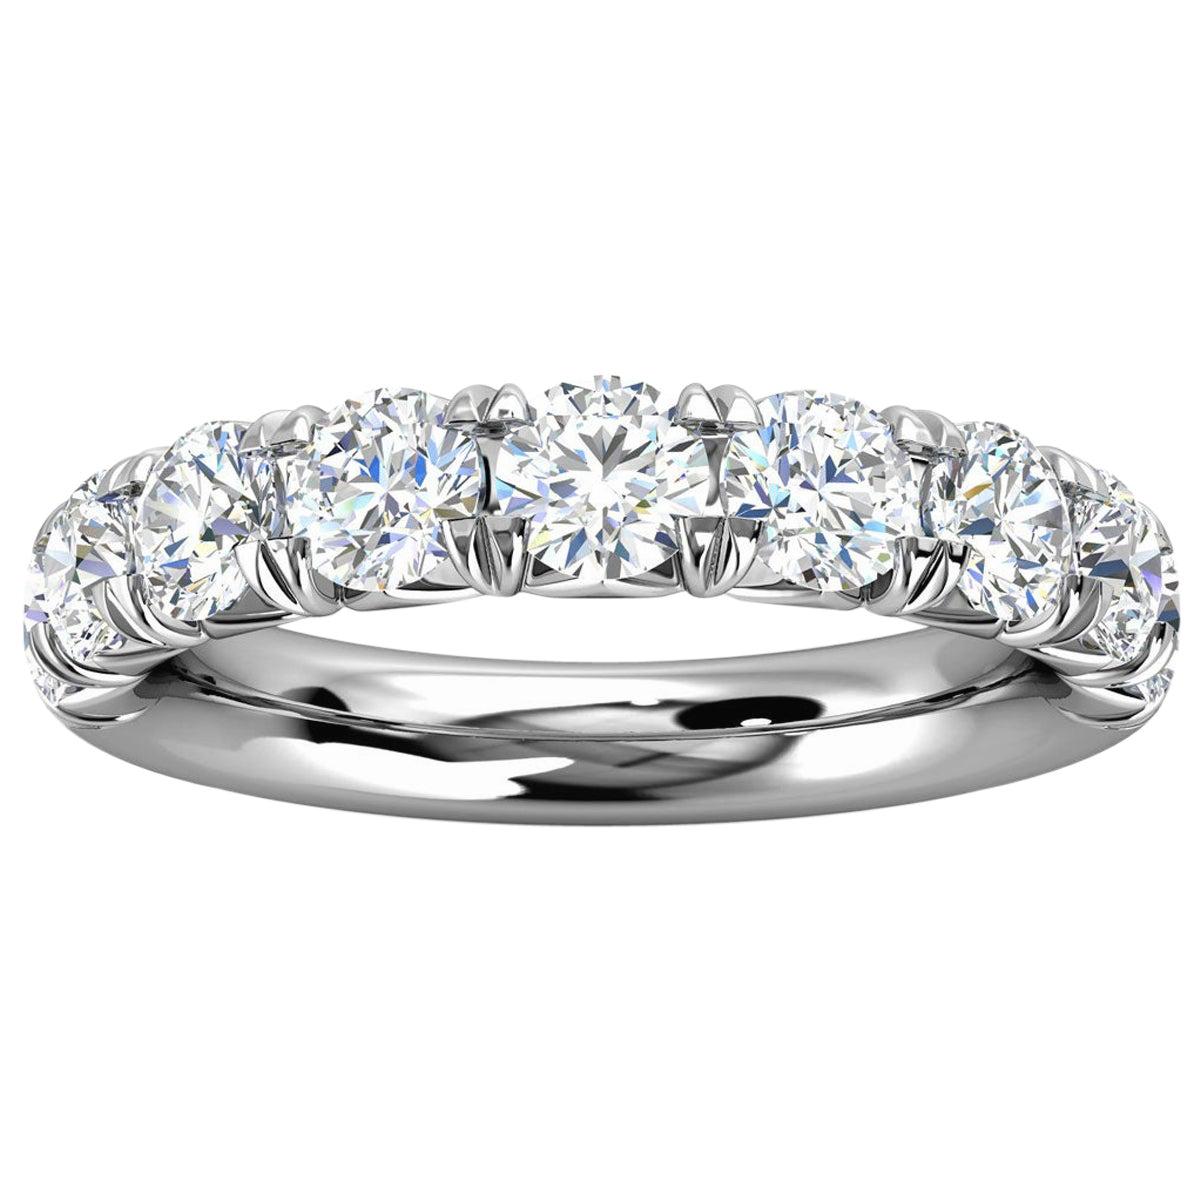 For Sale:  Platinum Voyage French Pave Diamond Ring '1 1/2 Ct. Tw'